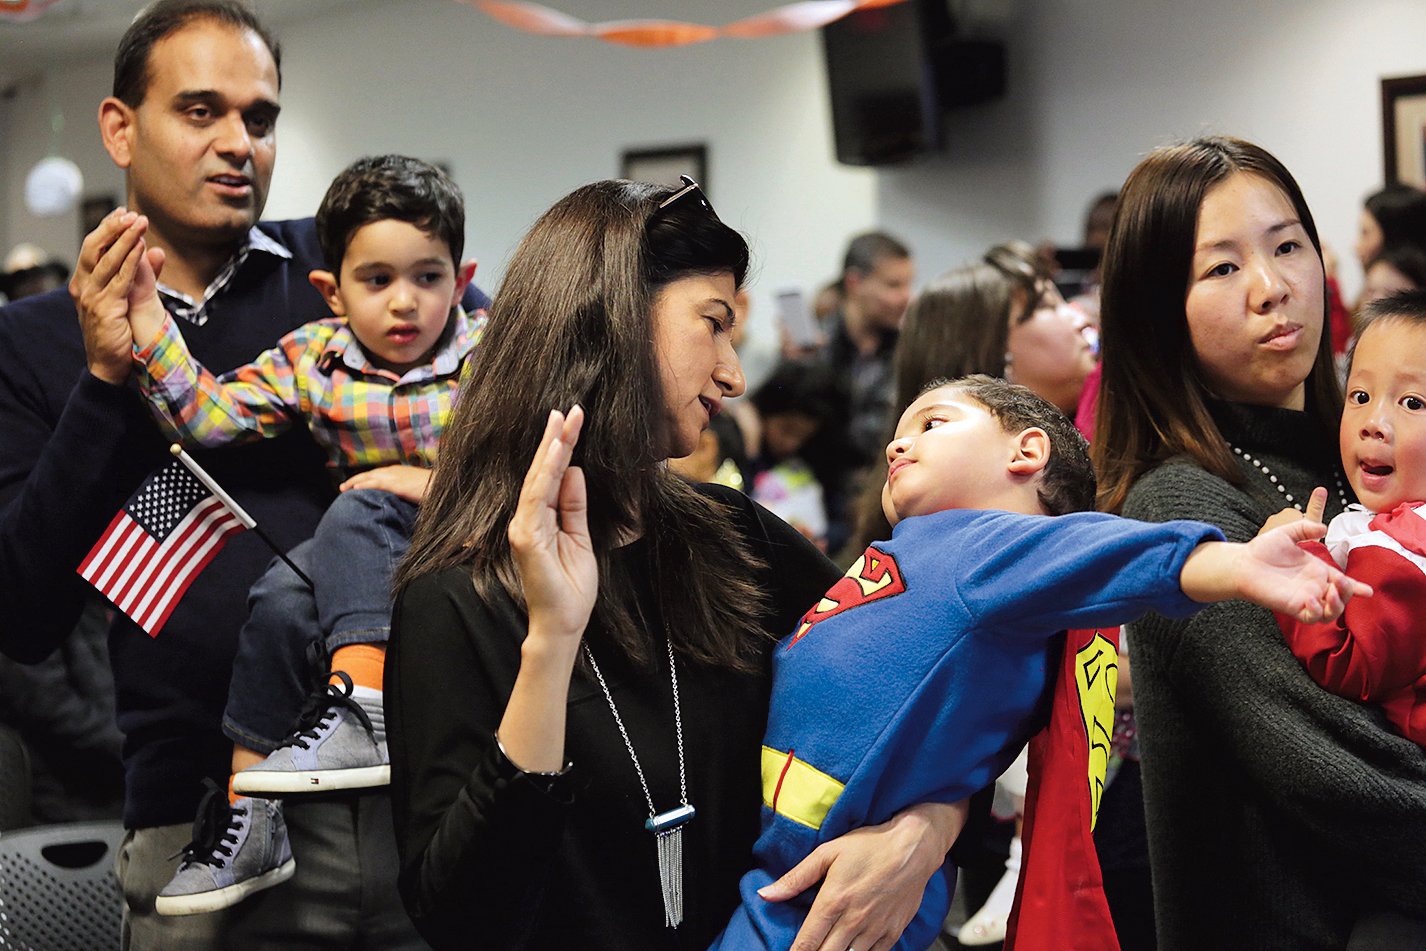 Photographs of Immigrants Becoming U.S. Citizens: US Citizenship and Immigration Services, October 31, 2018. Children being sworn in were invited to wear Halloween costumes and trick-or-treat in the office.